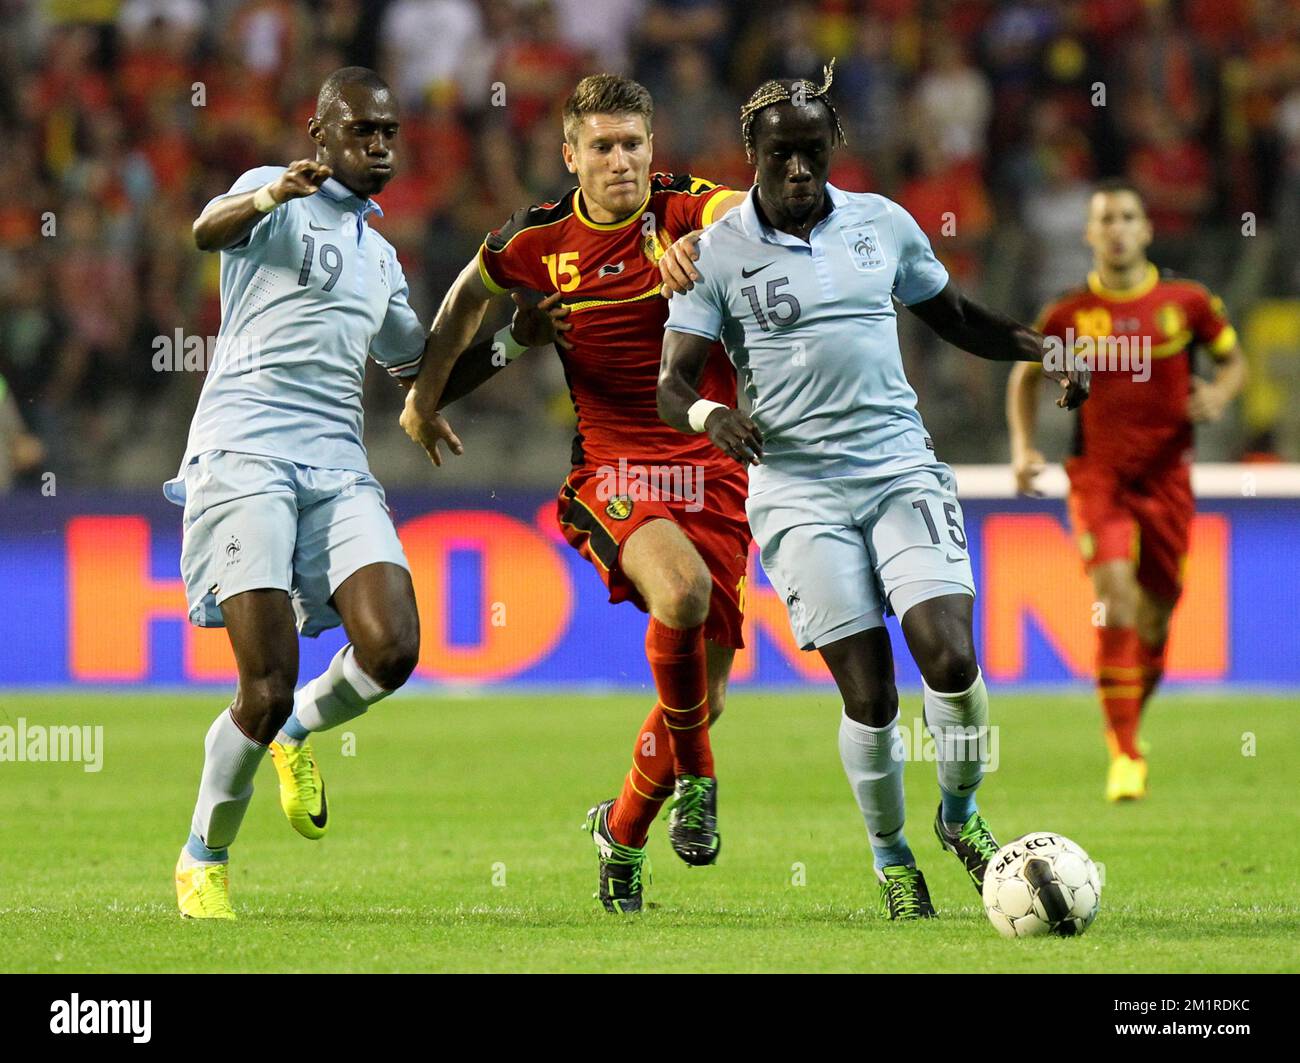 Belgium's Sebastien Pocognoli and French Bacary Sagna fight for the ball during a friendly game of the Belgian national soccer team Red Devils against France's national soccer team, Wednesday 14 August 2013, in the King Baudouin Stadium (Stade Roi Baudouin/Koning Boudewijnstadion), in Brussels.  Stock Photo